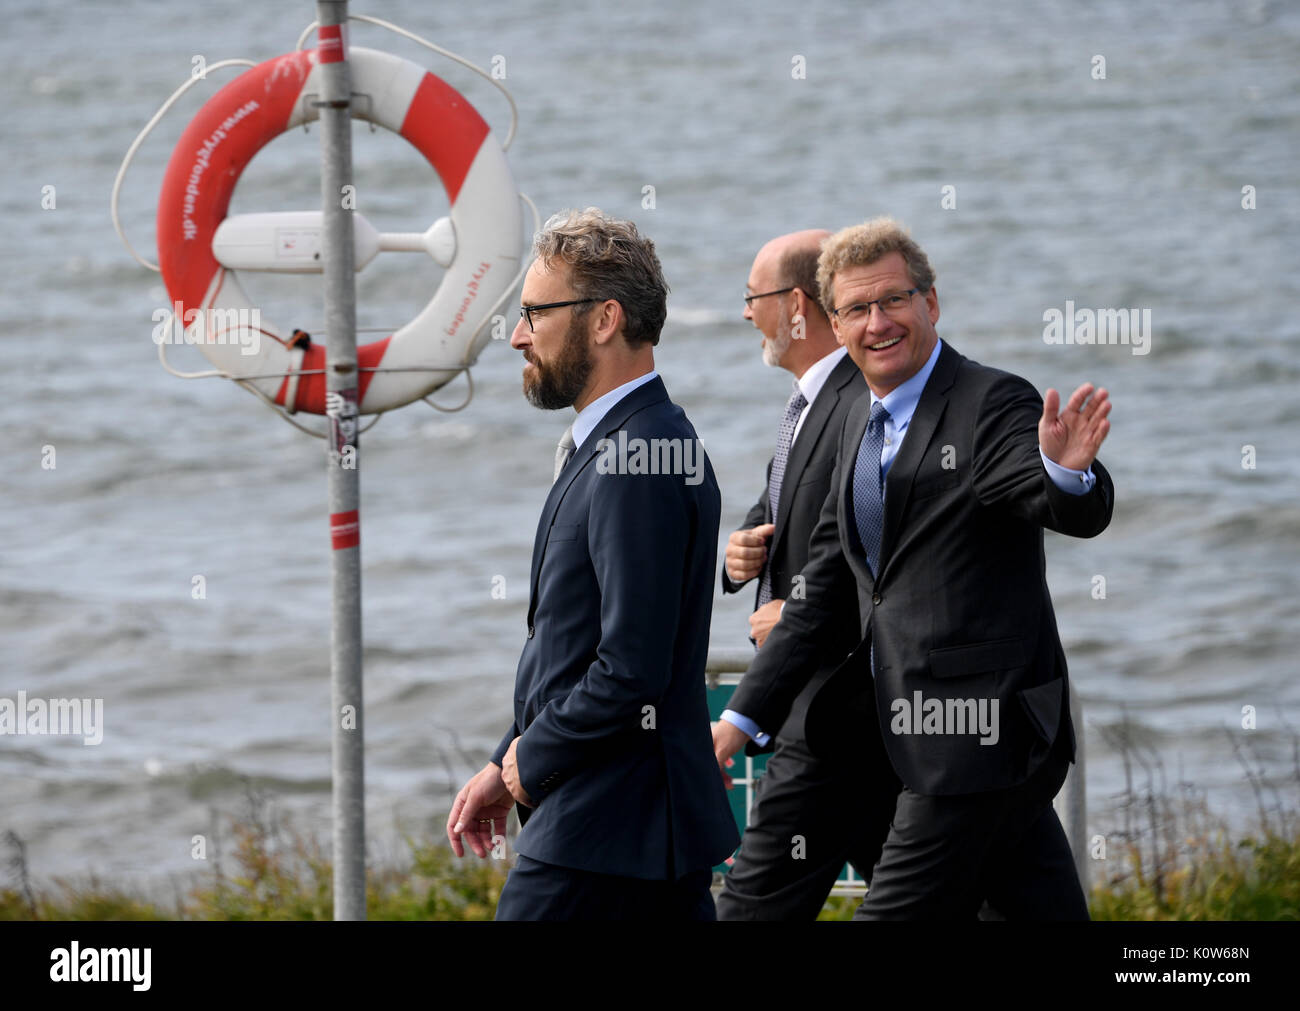 Denmark. 25th August, 2017. The Economy Minister of the state of Schleswig-Holstein, Bernd Buchholz (R), walking with his Danish counterpart Ole Birk Olesen (L) and the deputy project director Ajs Dam to the site of the proposed tunnel in Rødbyhavn, Denmark, 25 August 2017. The topic of the talks was the future Fehmarnbelt tunnel. Photo: Carsten Rehder/dpa/Alamy Live News Stock Photo